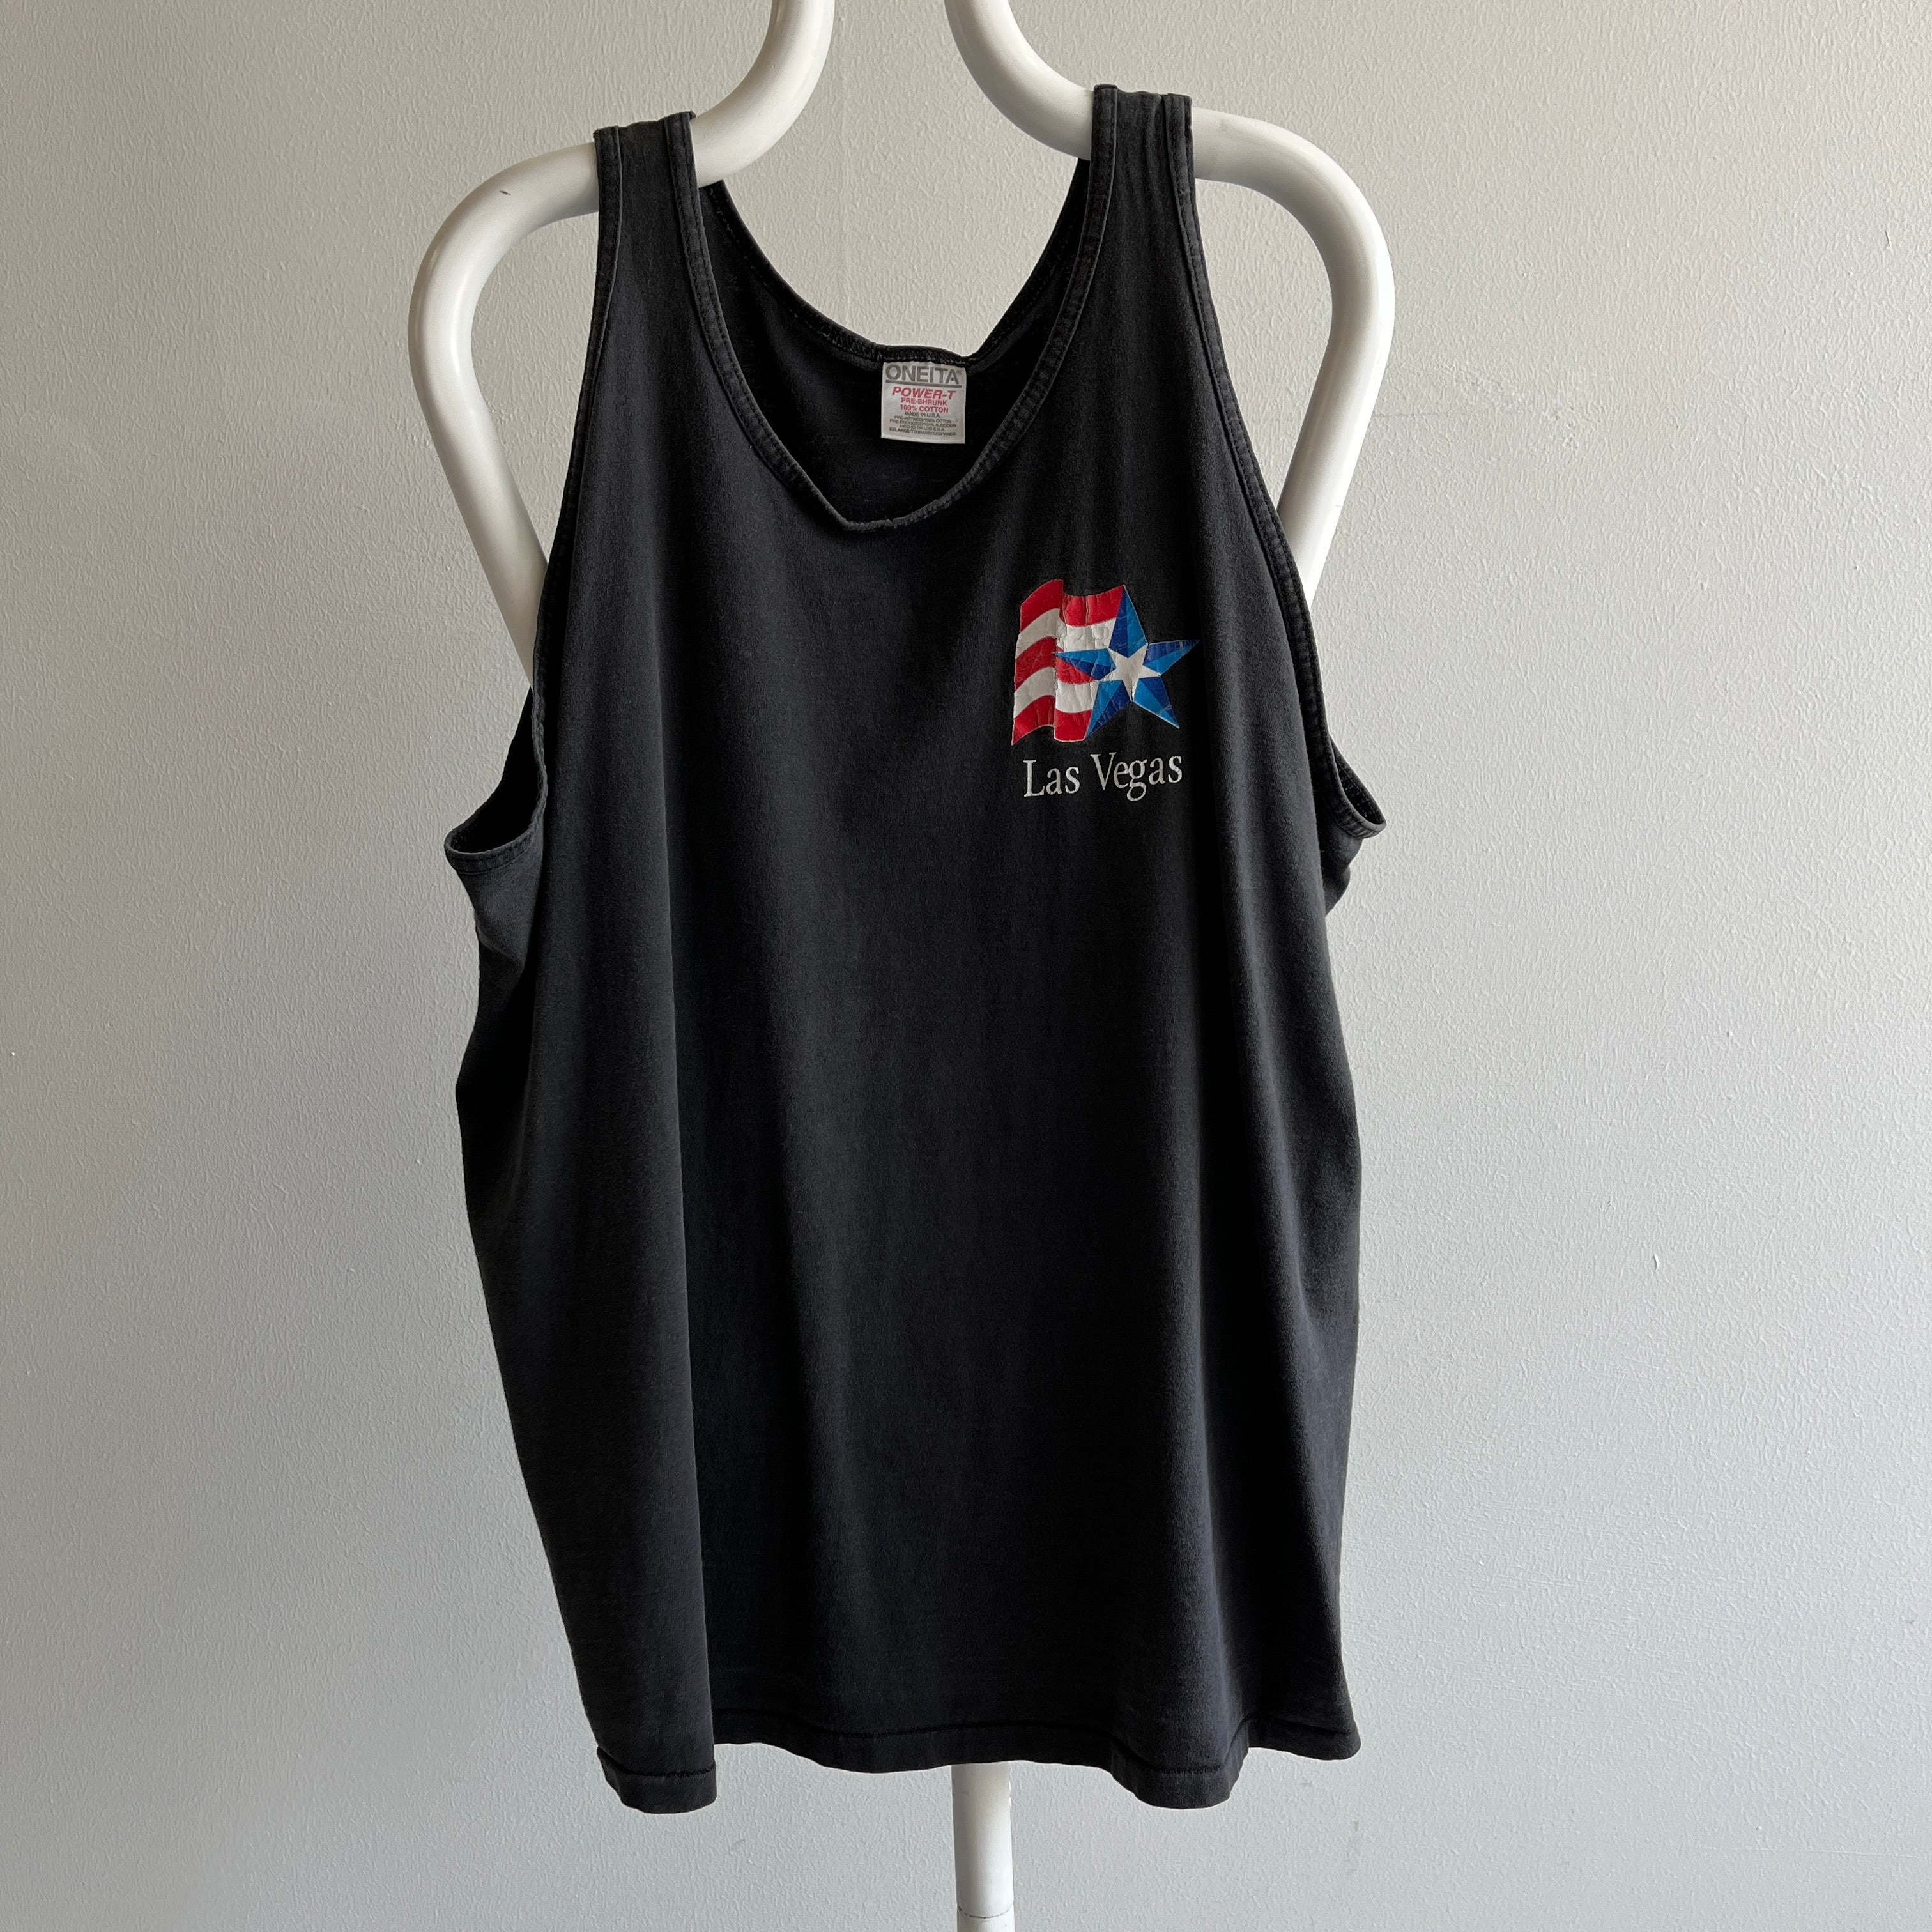 1990s Las Vegas Cotton Tank Top - Nicely Worn and Faded